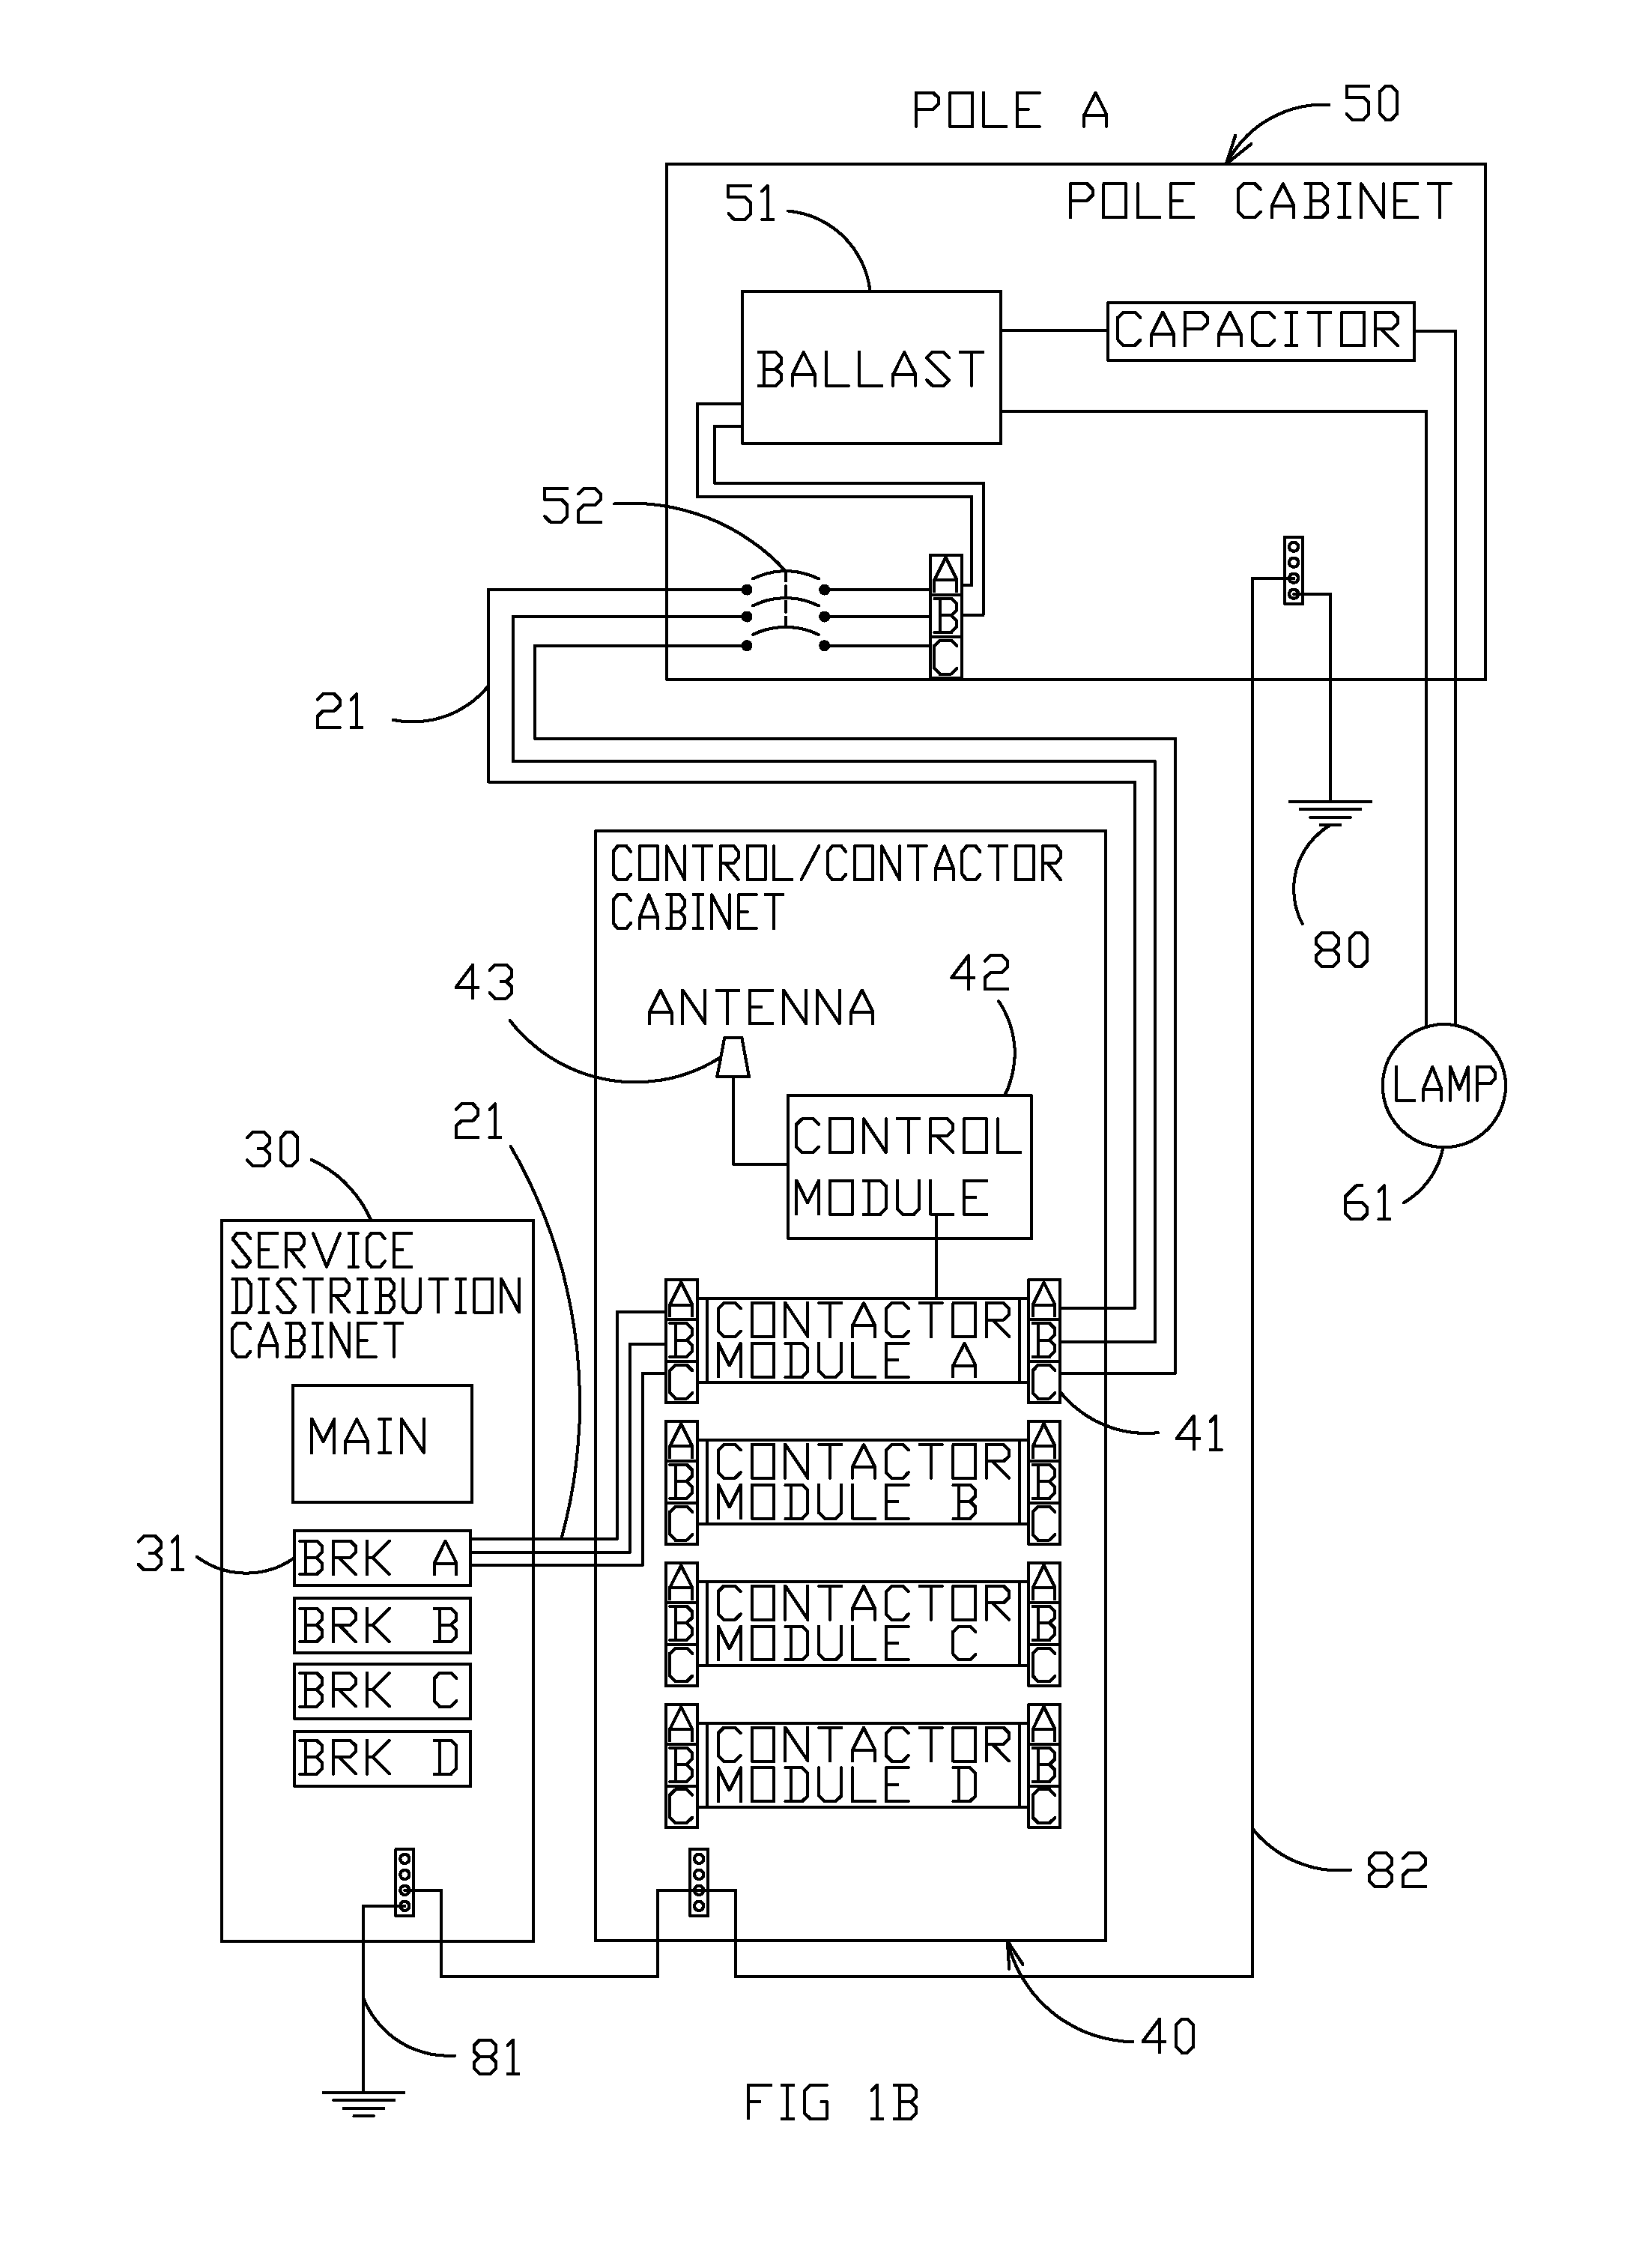 Apparatus, method, and system for integrating ground fault circuit interrupters in equipment-grounded high voltage systems